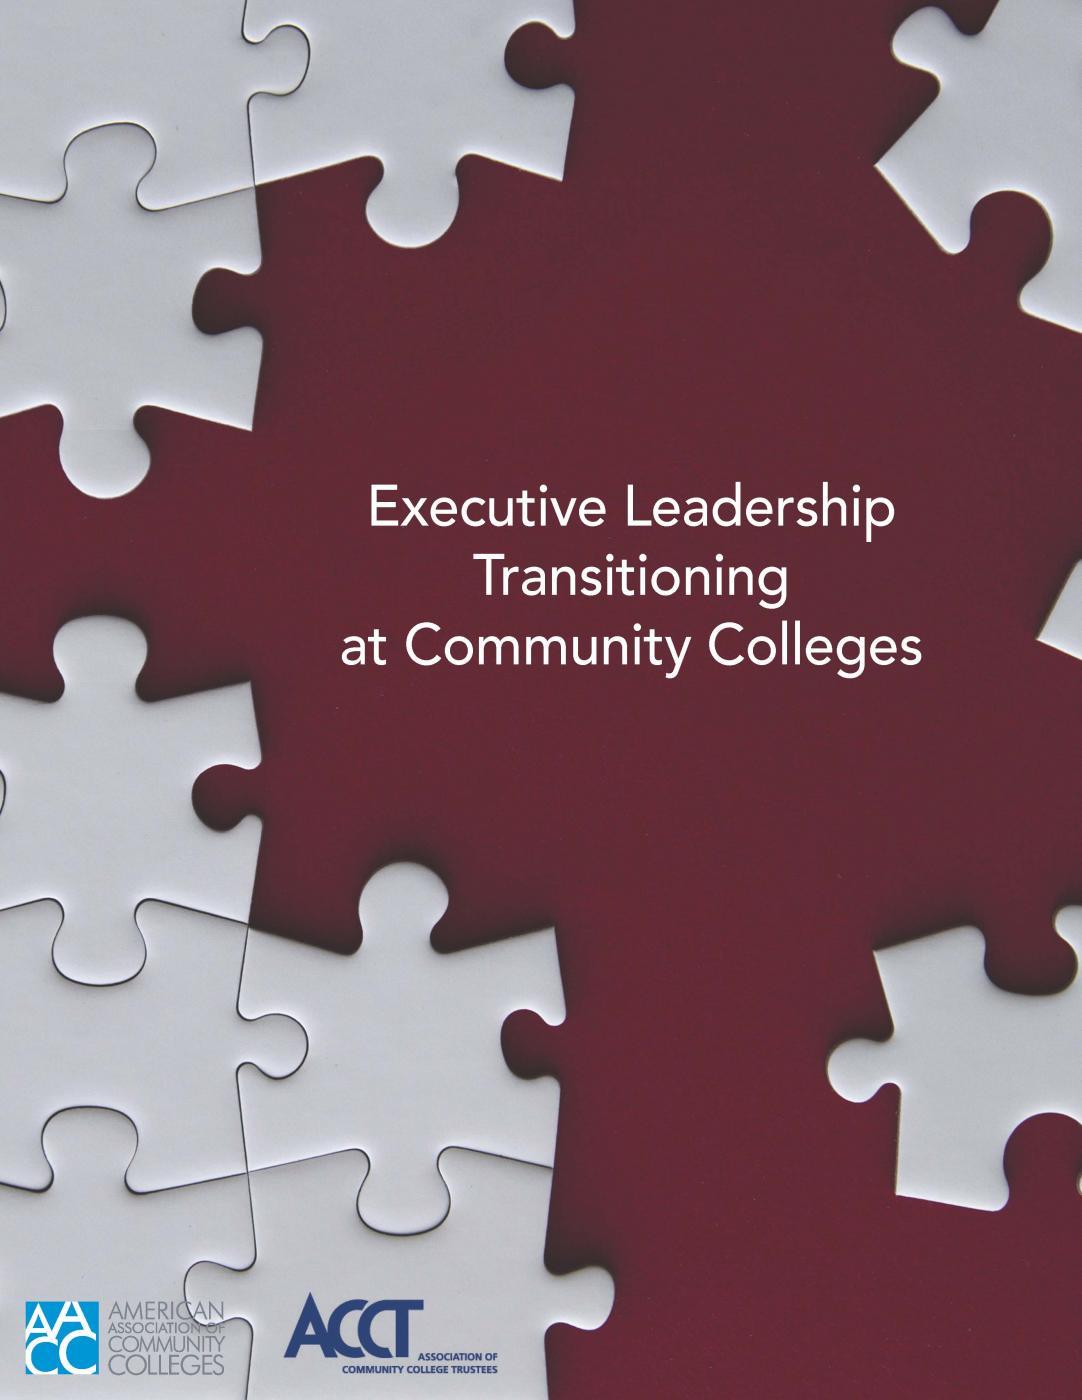 Executive Leadership Transitioning at Community Colleges (2018)